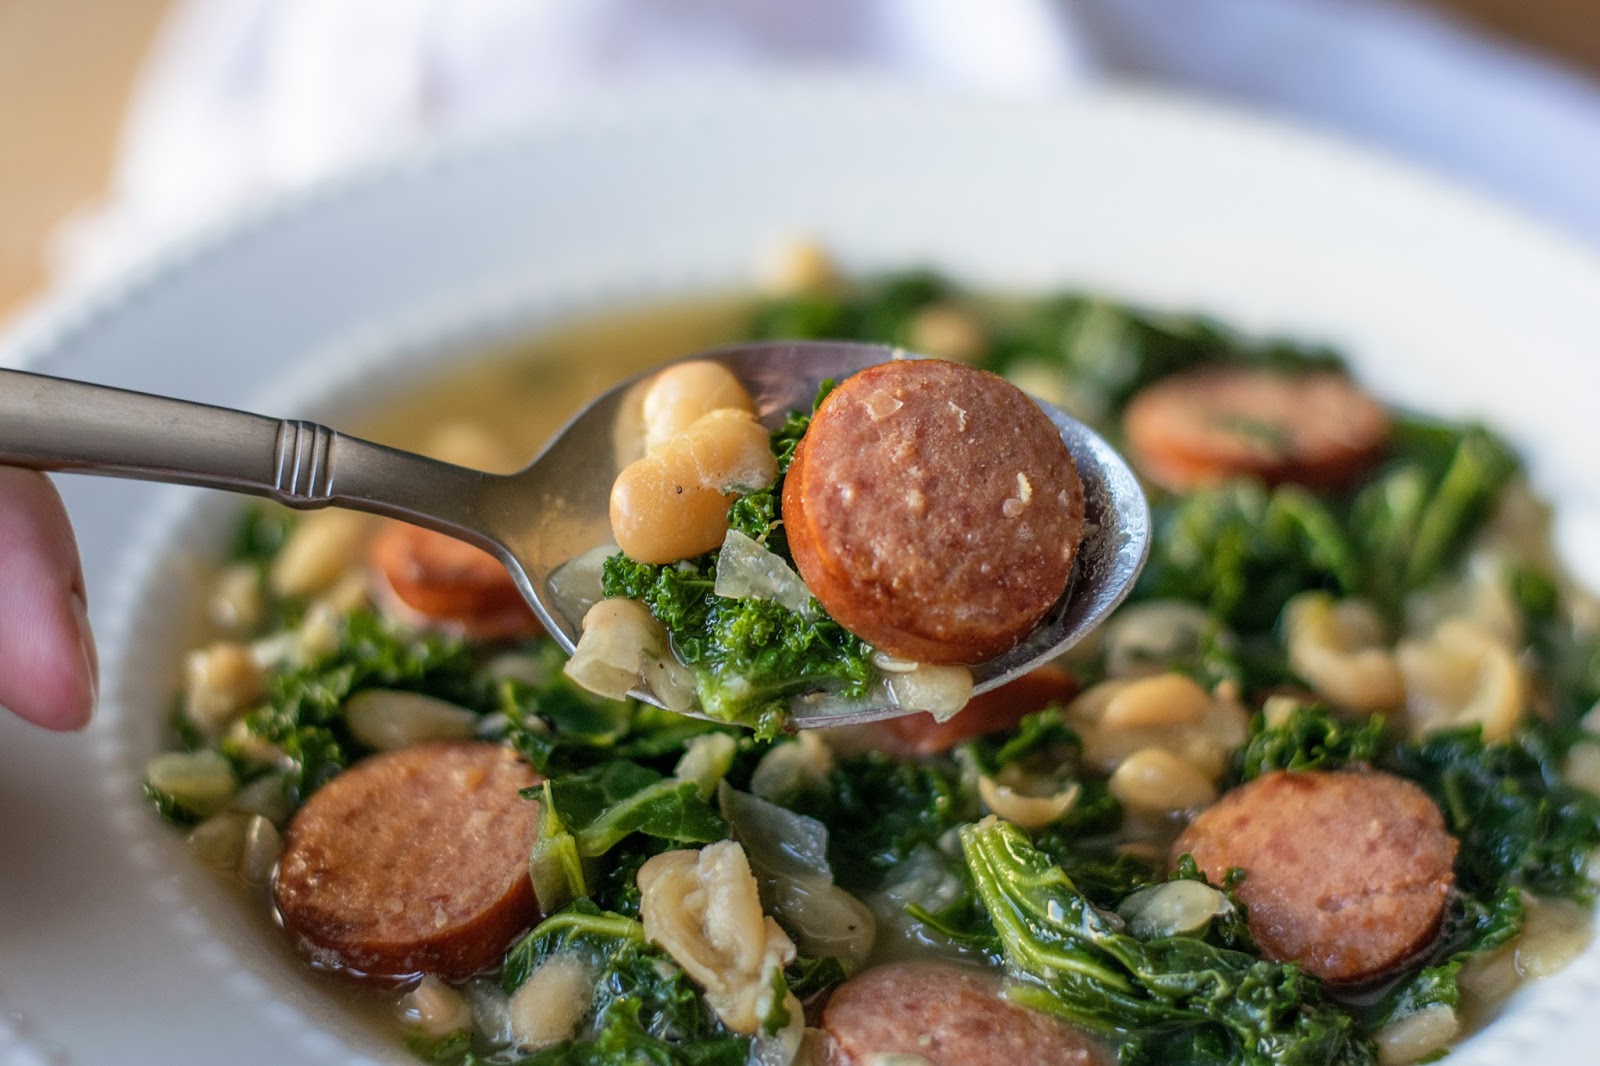 This White Bean, Sausage, and Kale Soup Recipe is so simple, so filling, and so delicious and is perfect for this unexpected early spring winter weather.